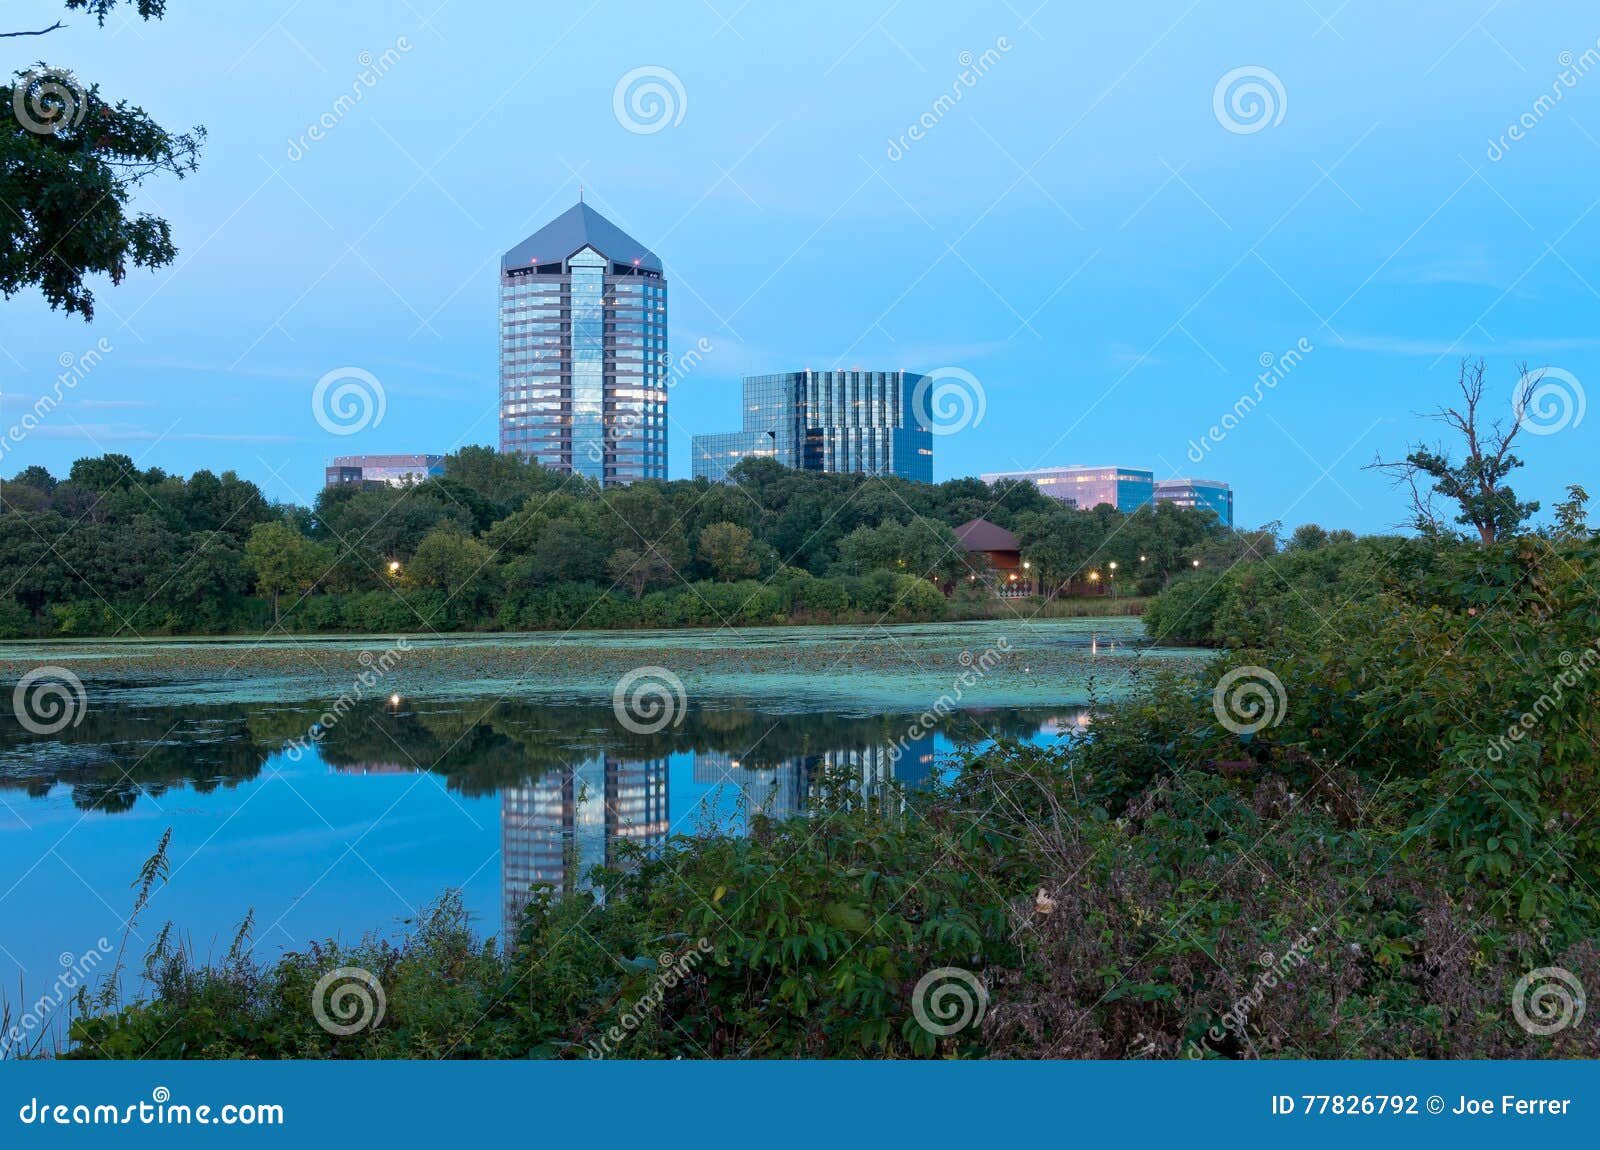 mount normandale lake and buildings